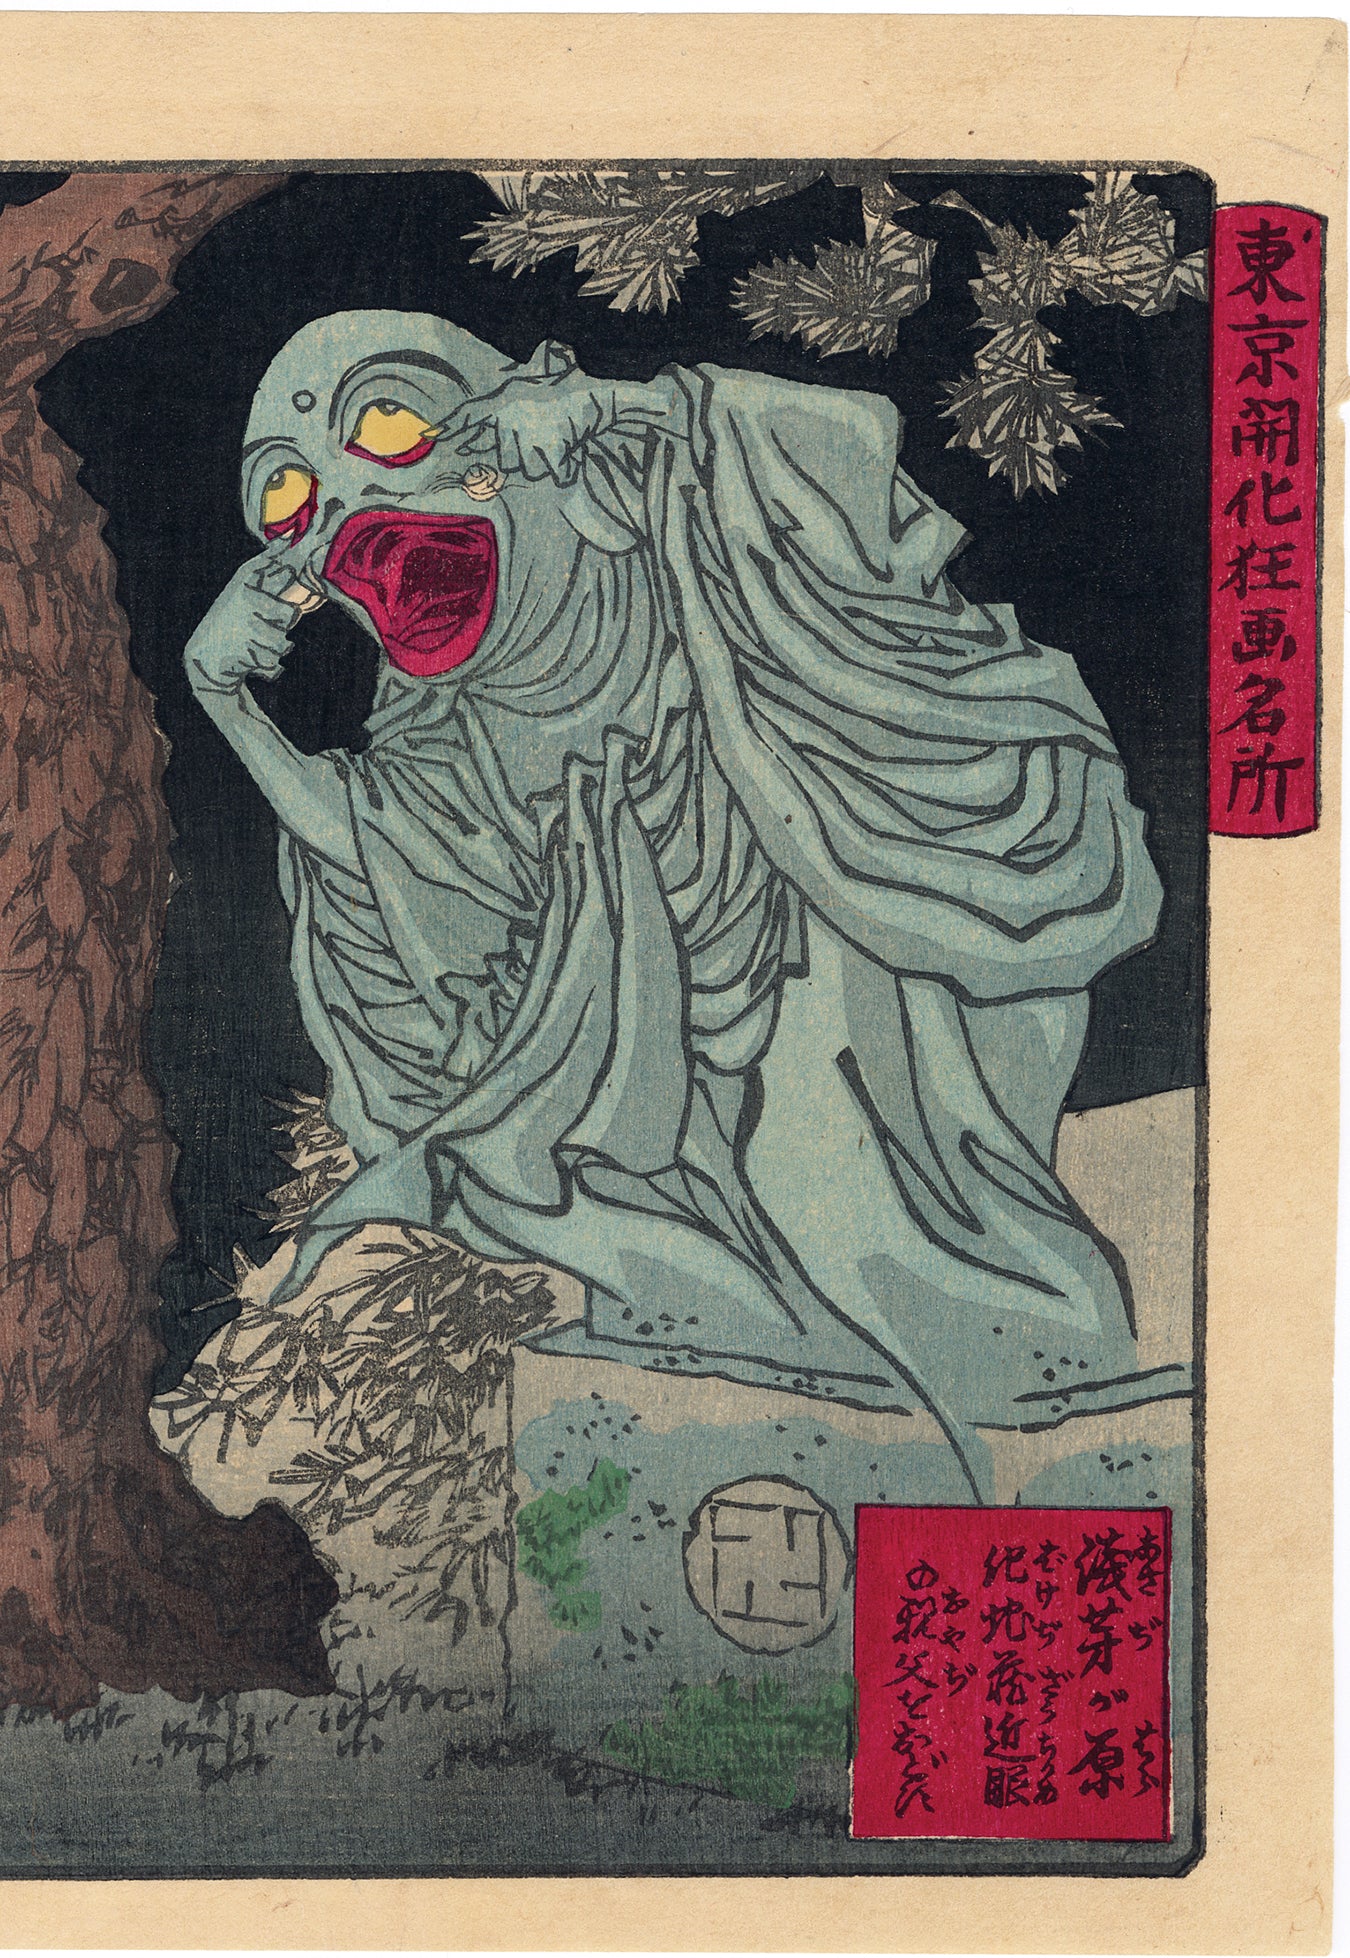 Yoshitoshi 芳年: A Ghost Jizō Startles a Near-Sighted Old Man at 